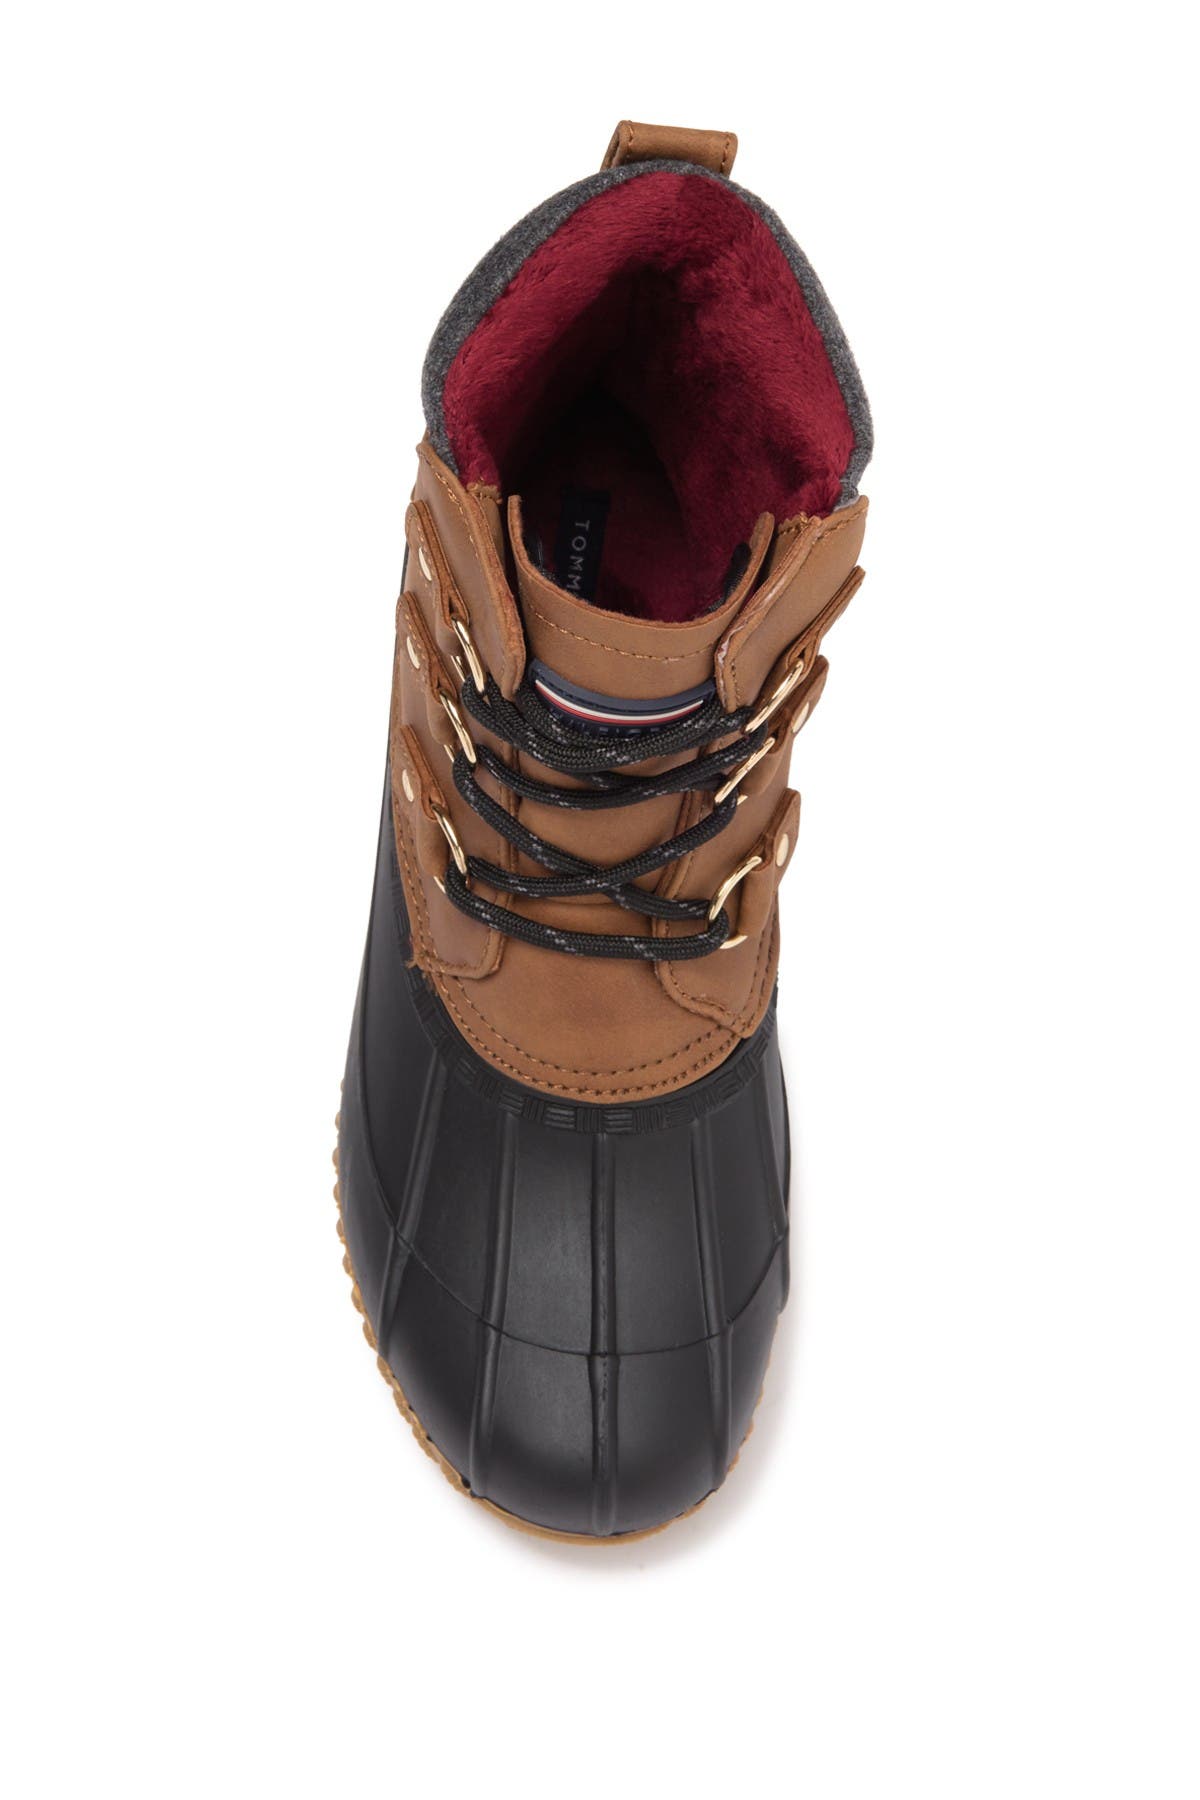 women's tommy hilfiger roza duck boots